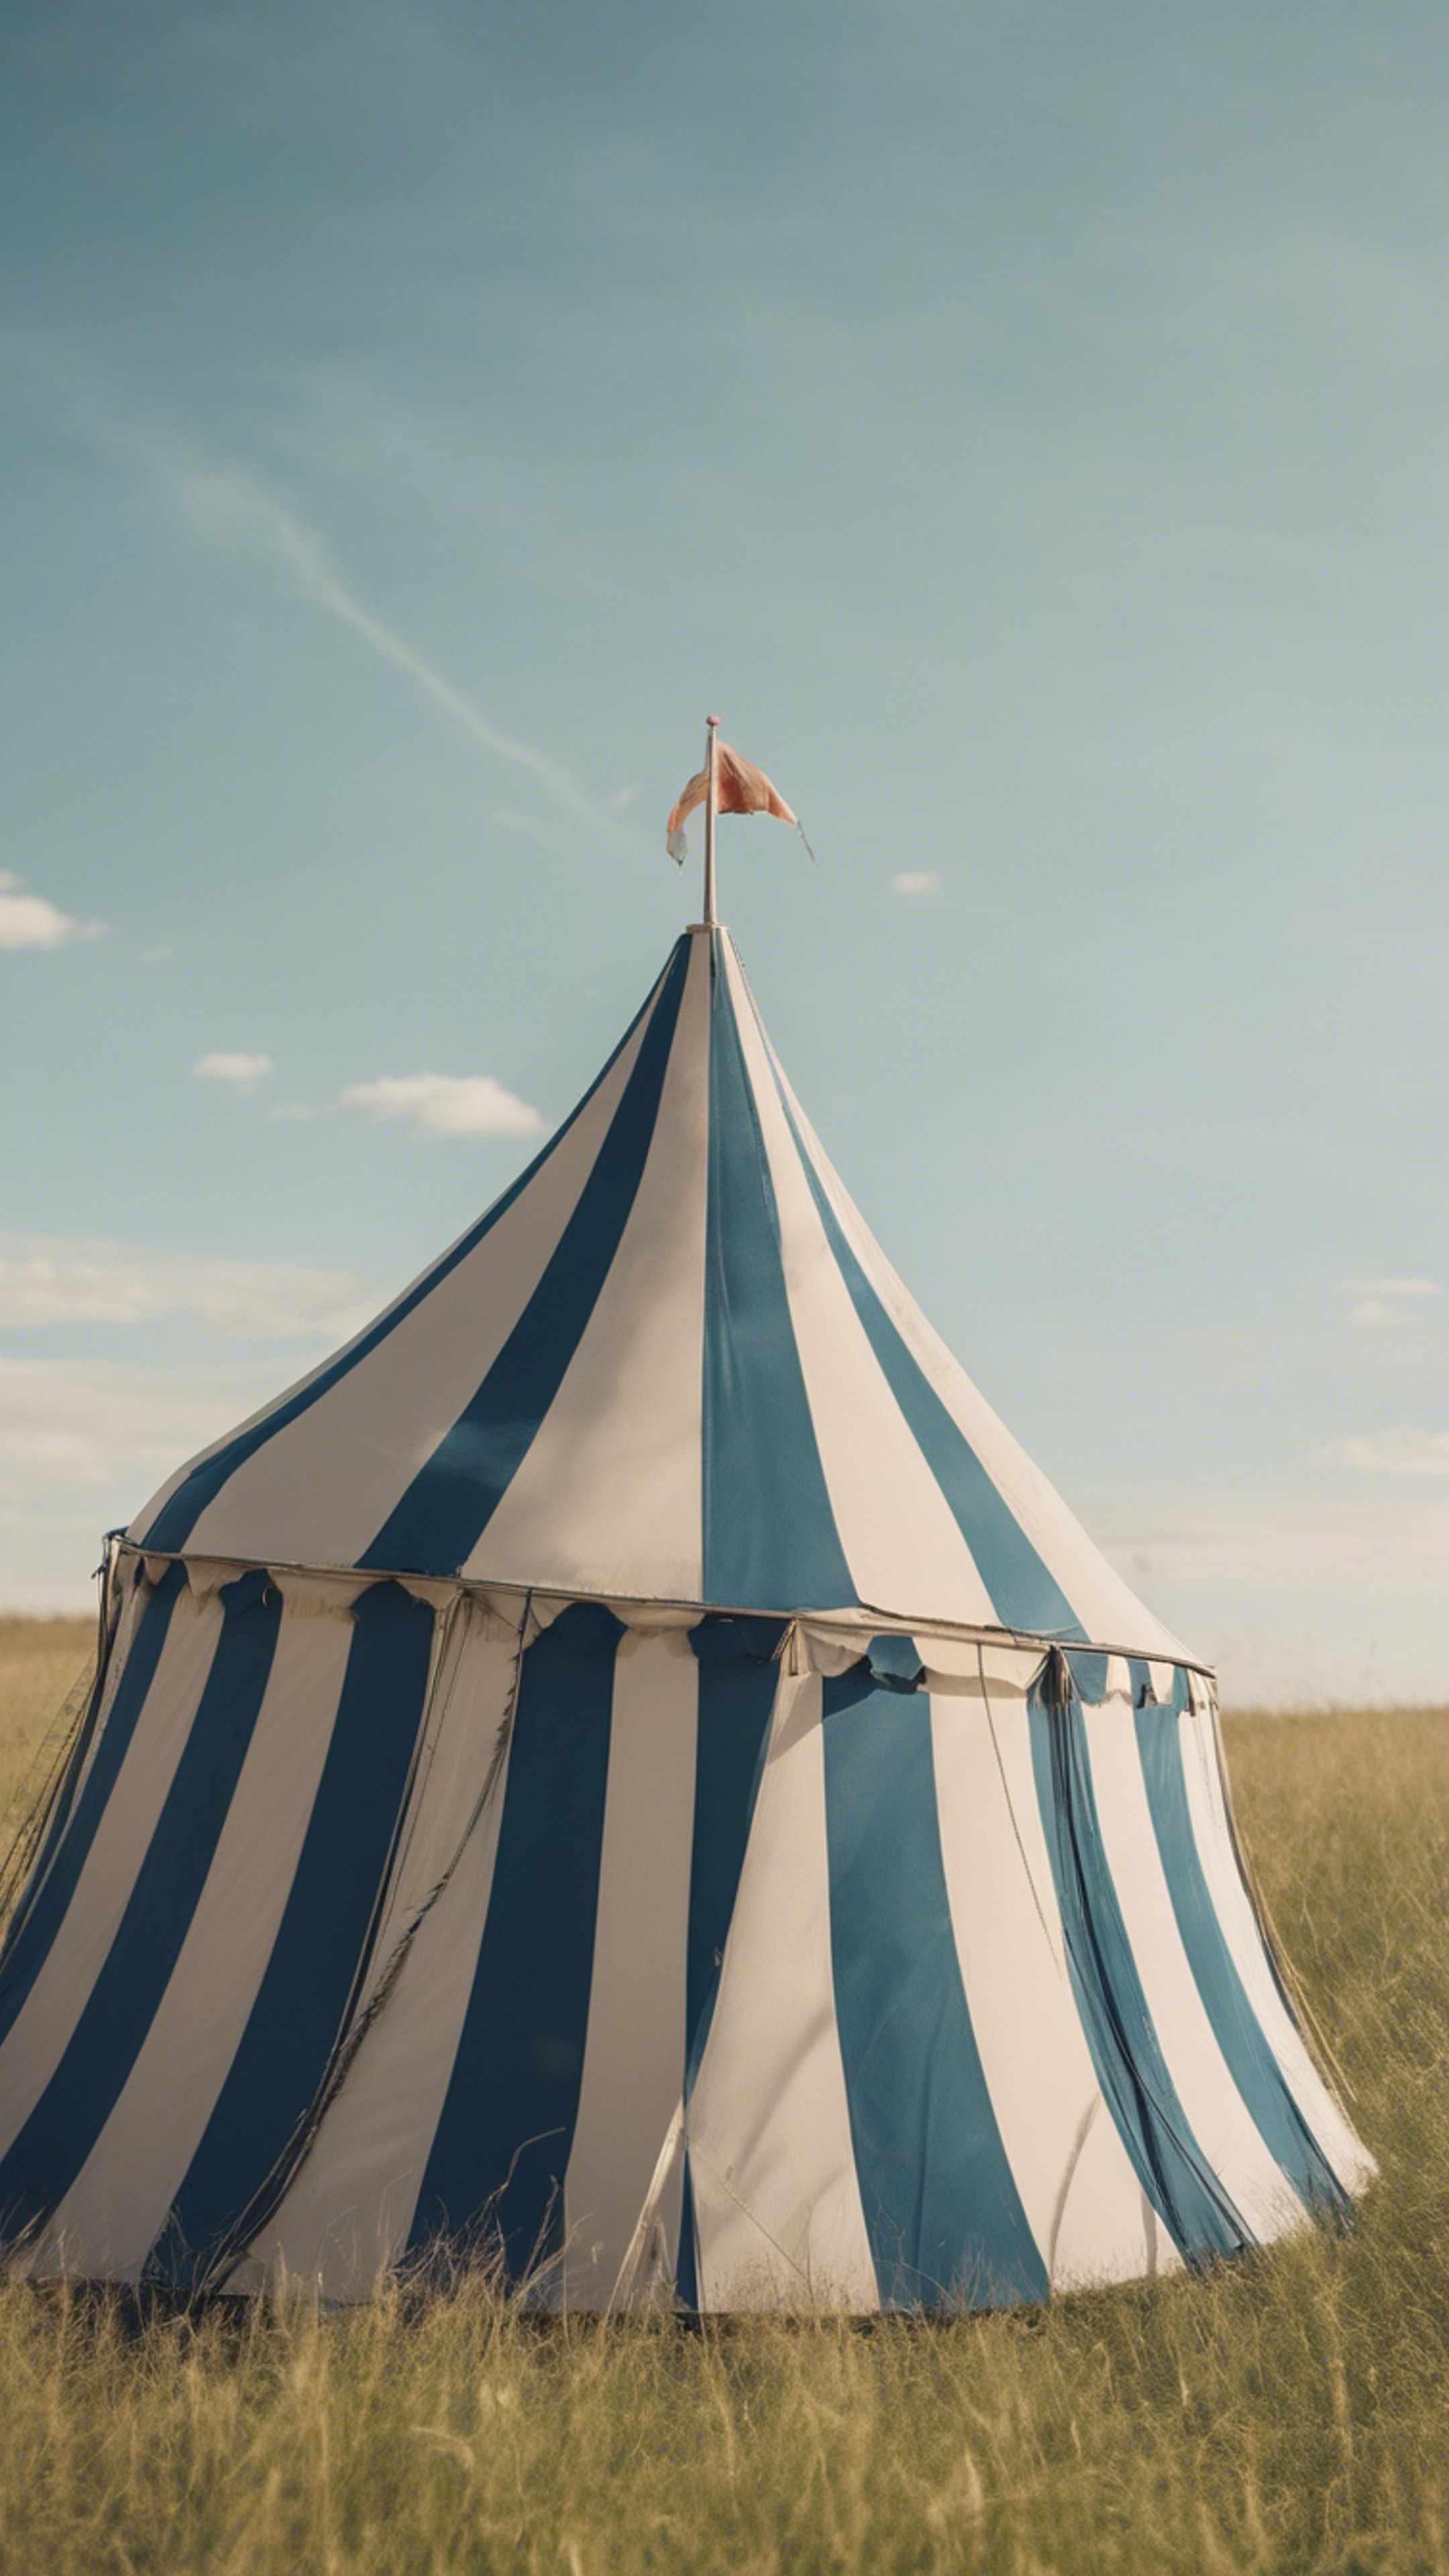 A vintage striped circus tent in a grassy field with a blue sky overhead.壁紙[07d58b74cbfe41aa8350]